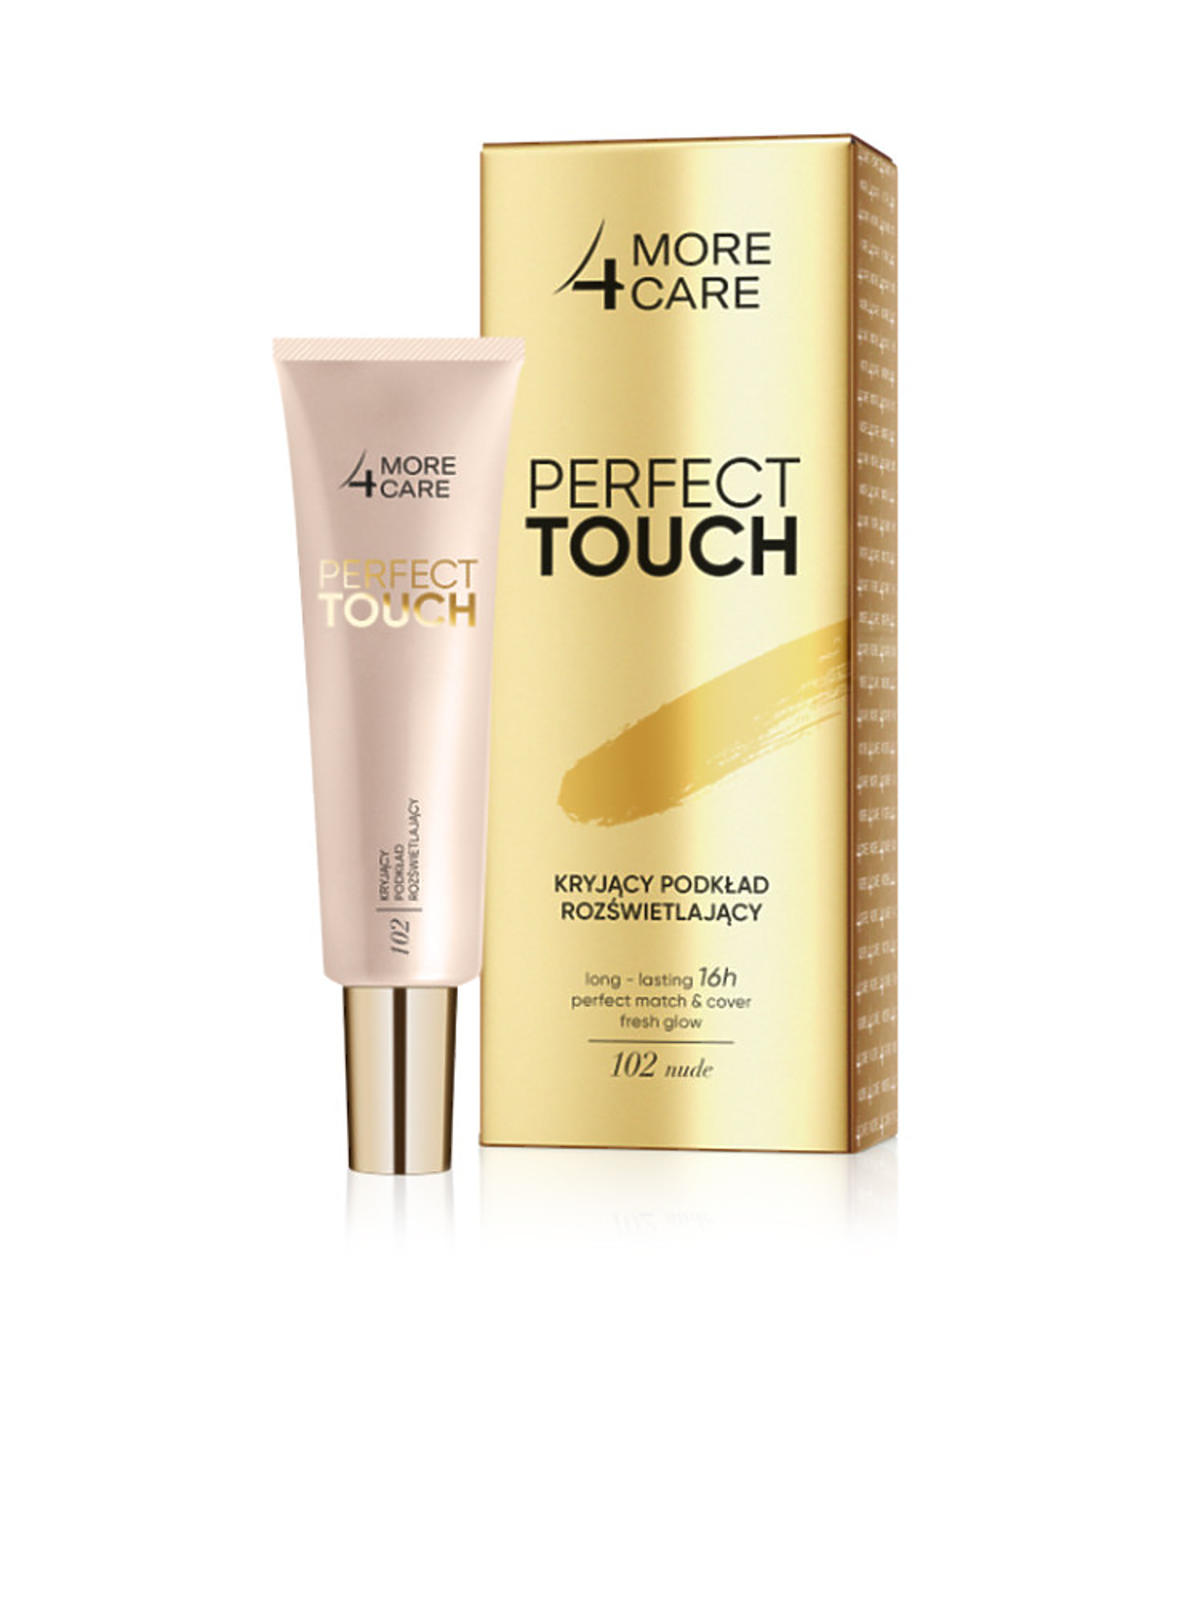 Perfect Touch, more4care